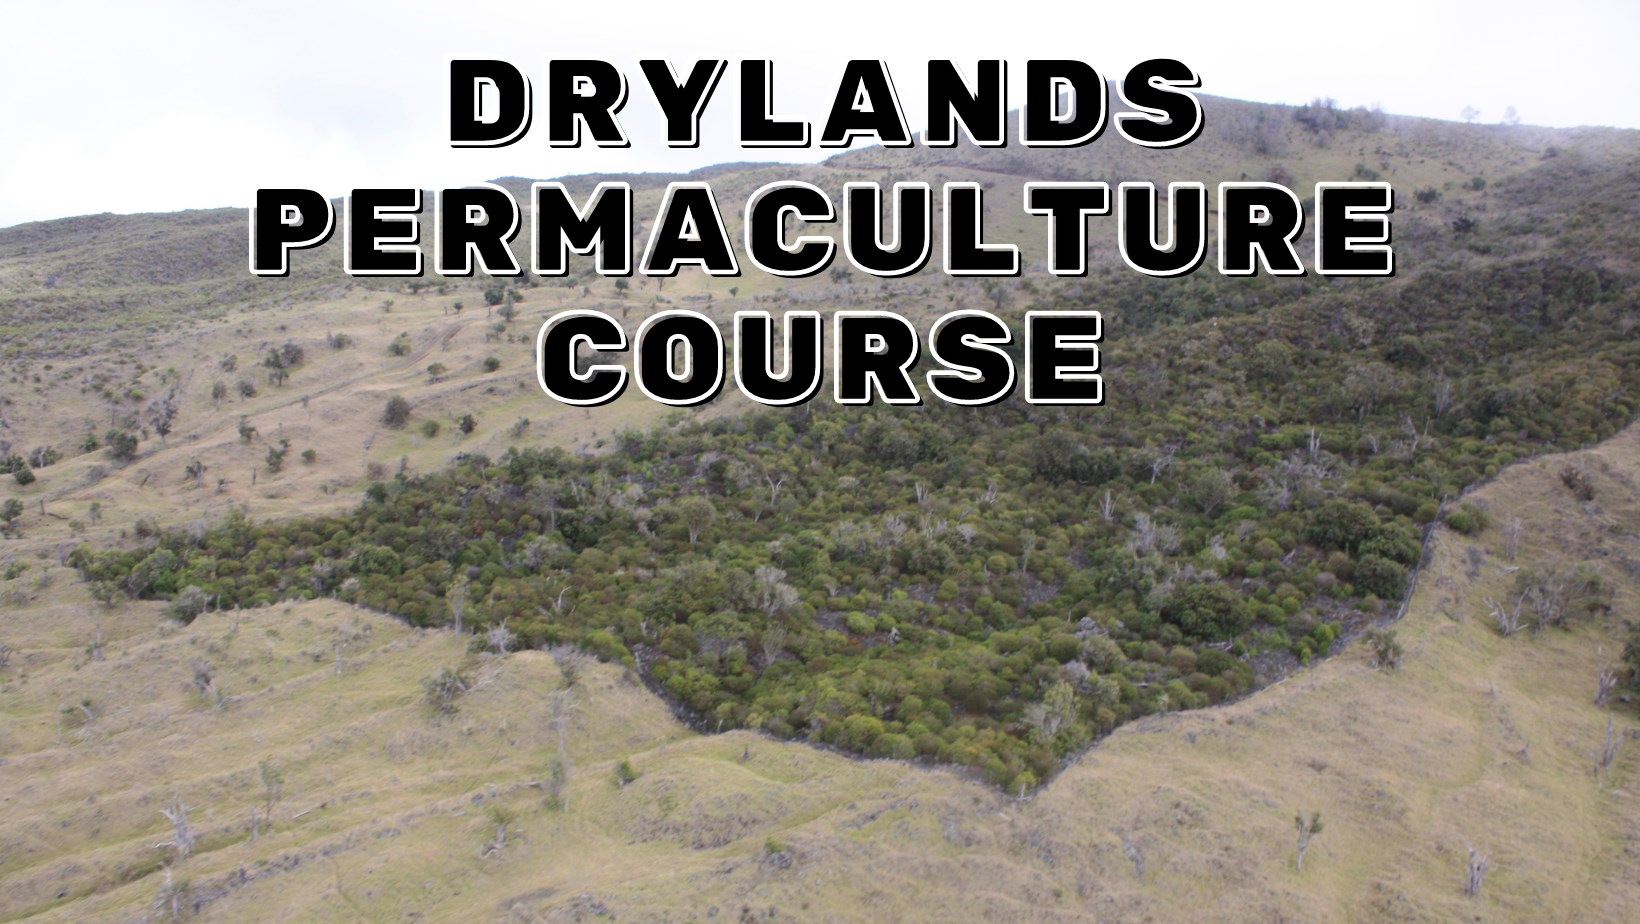 Photo of drylands restored using permaculture